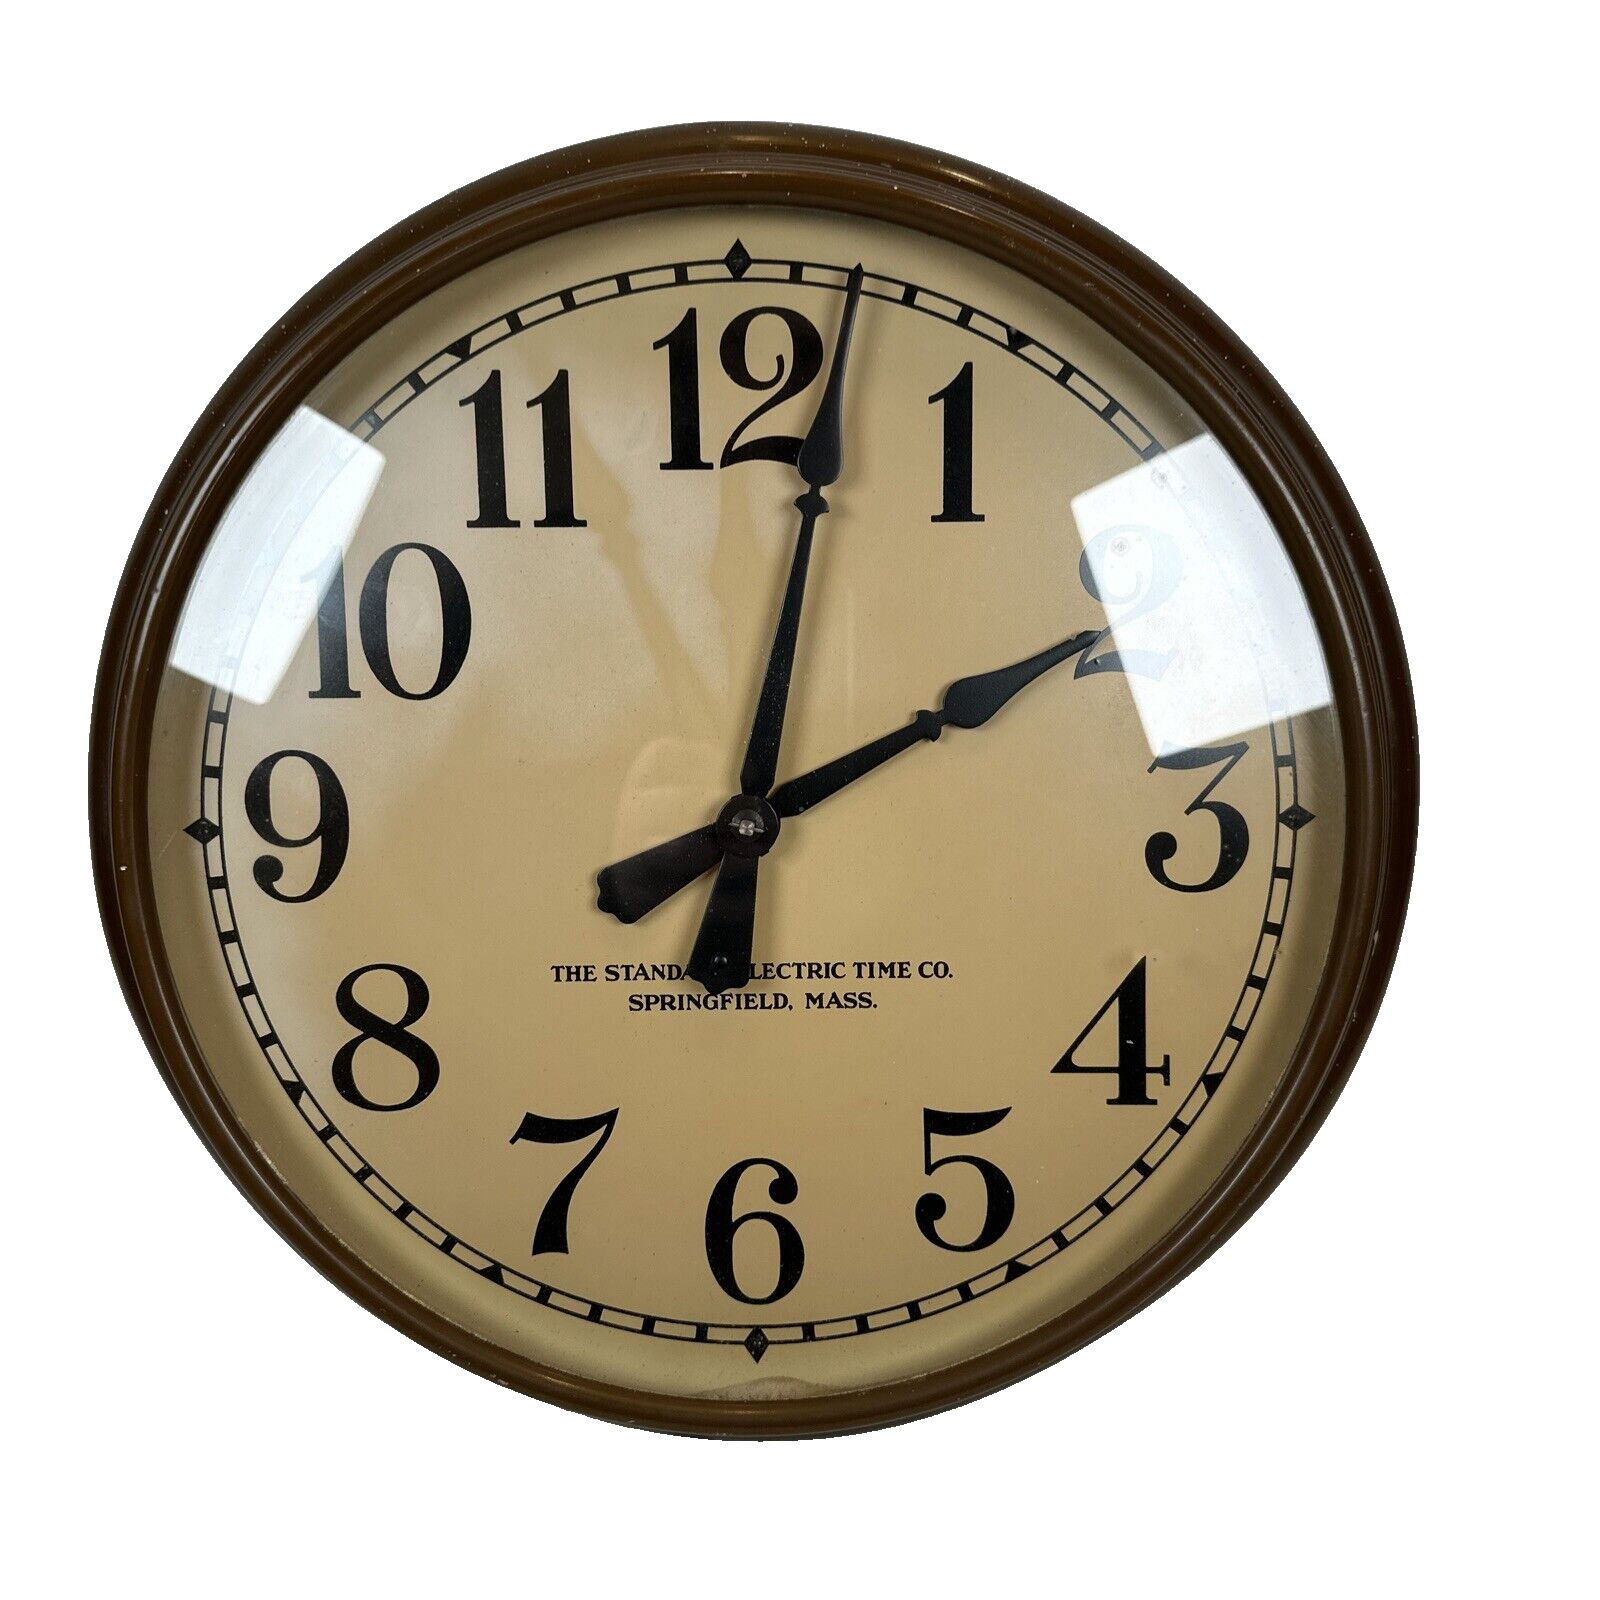 The Standard Electric Time Co. Springfield Mass - Vintage Electric Wall Clock